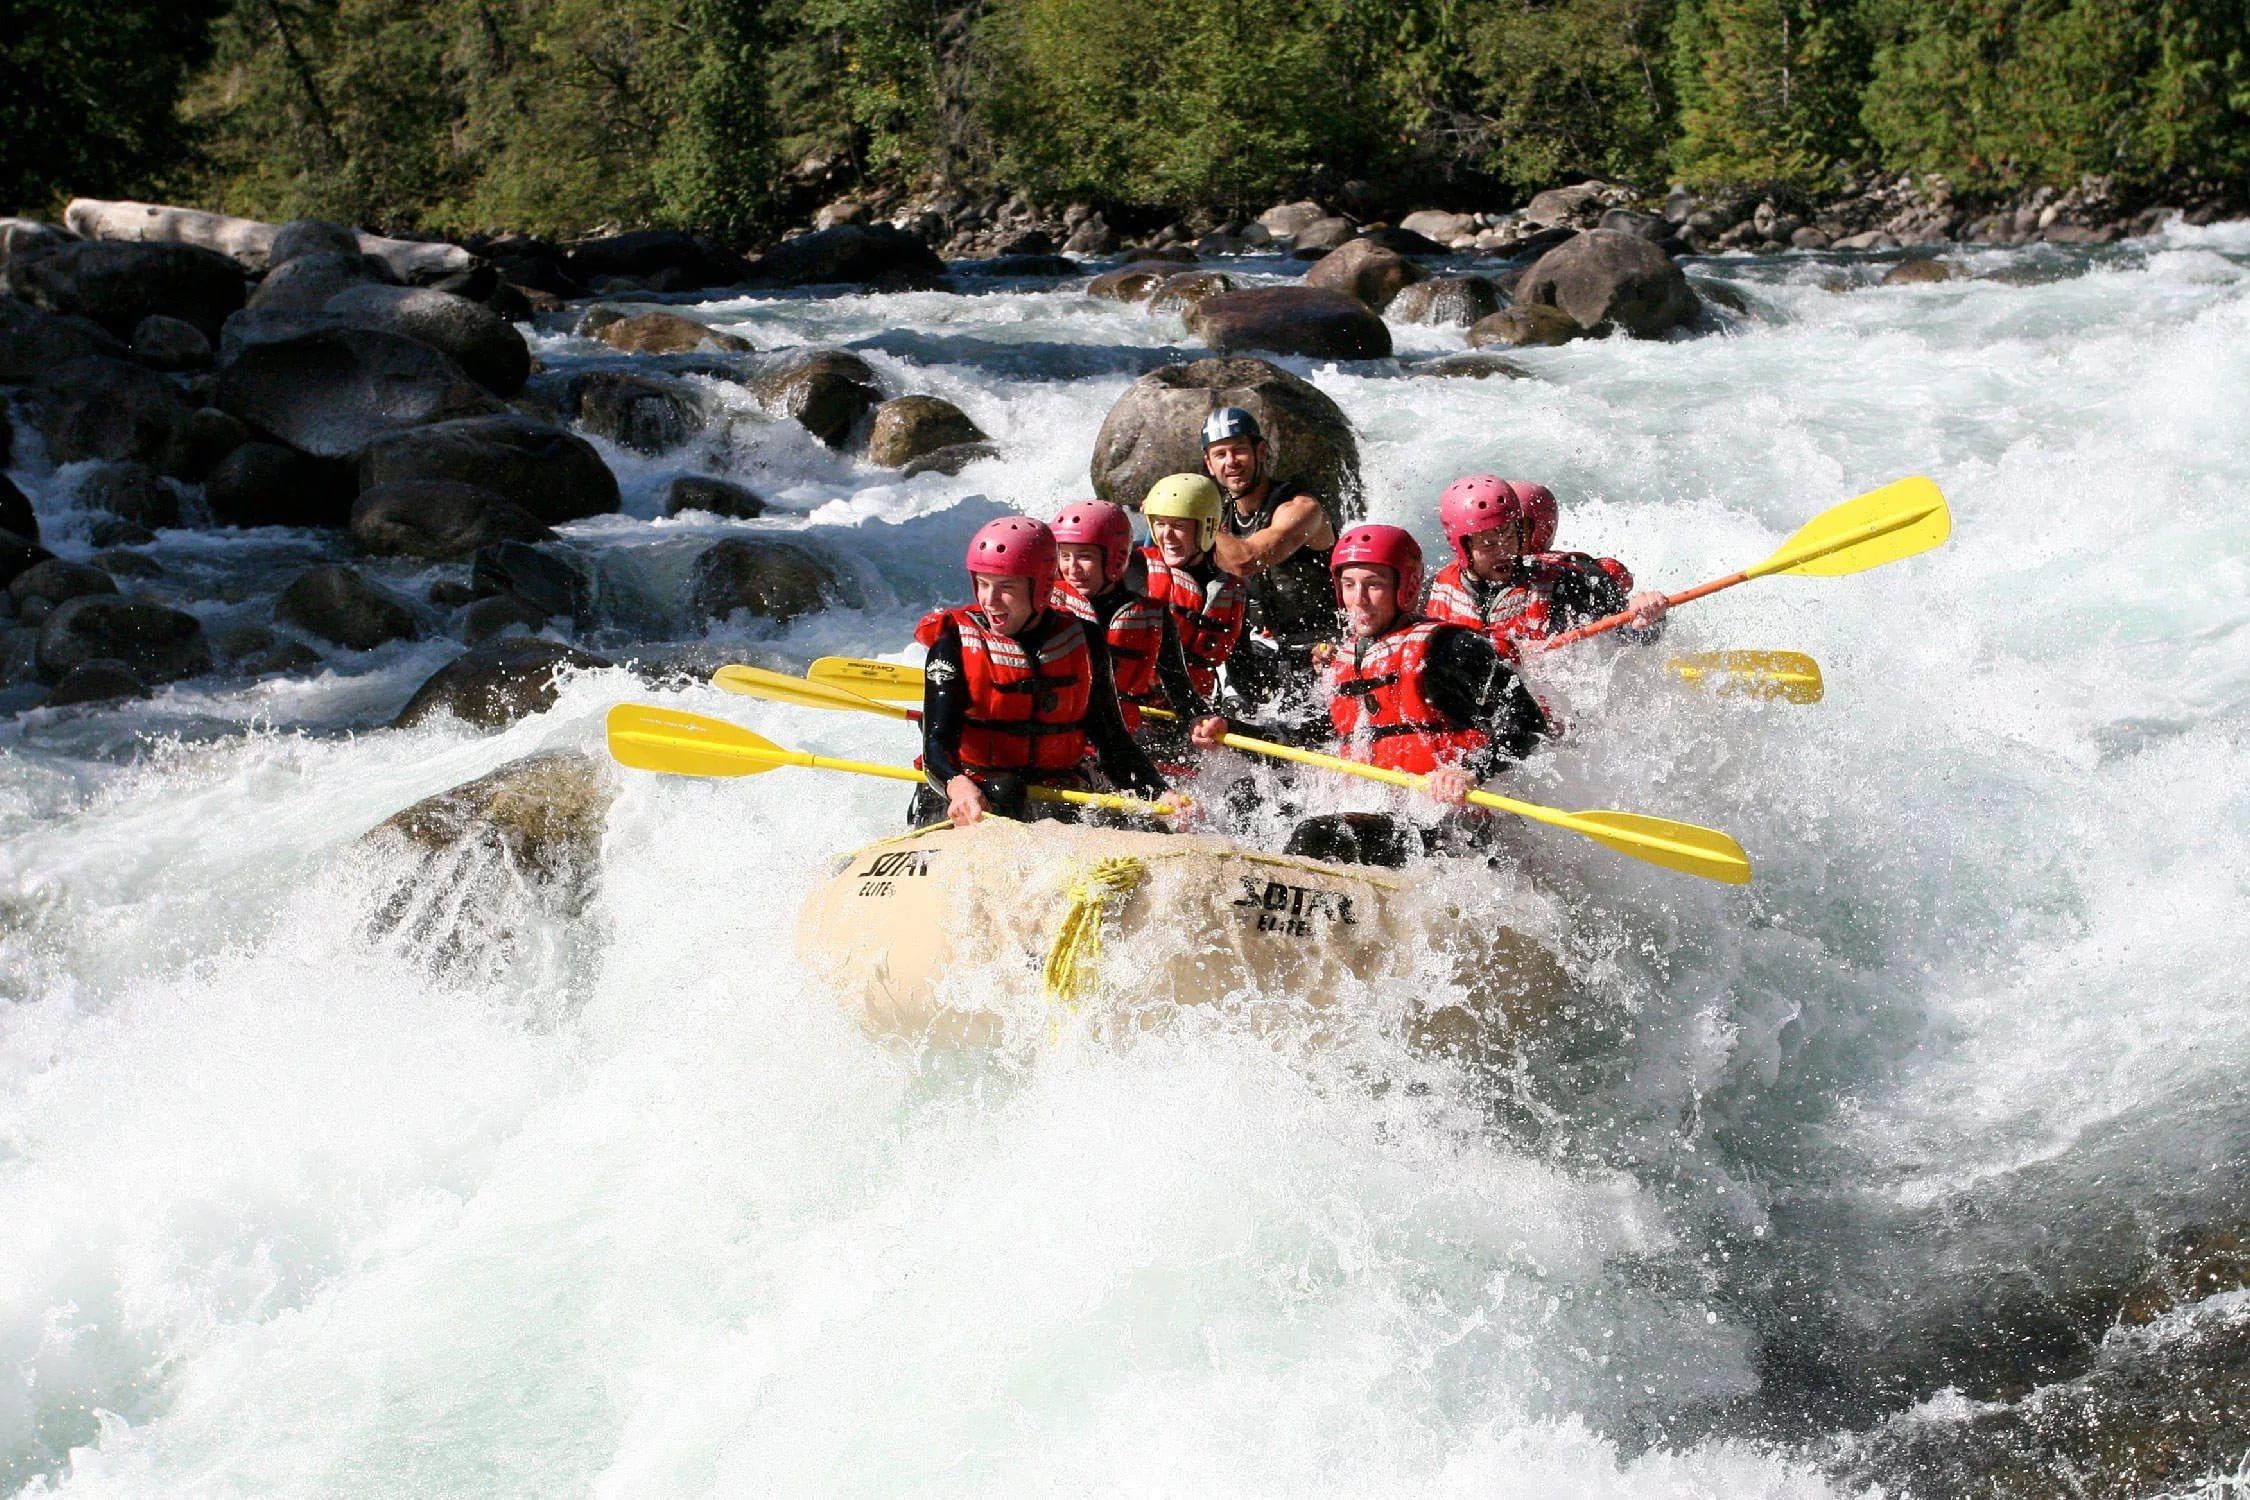 Rafting: Long and violent rapids full of large rocks - whitewater boating of a 4-5 class of difficulty. 2250x1500 HD Wallpaper.